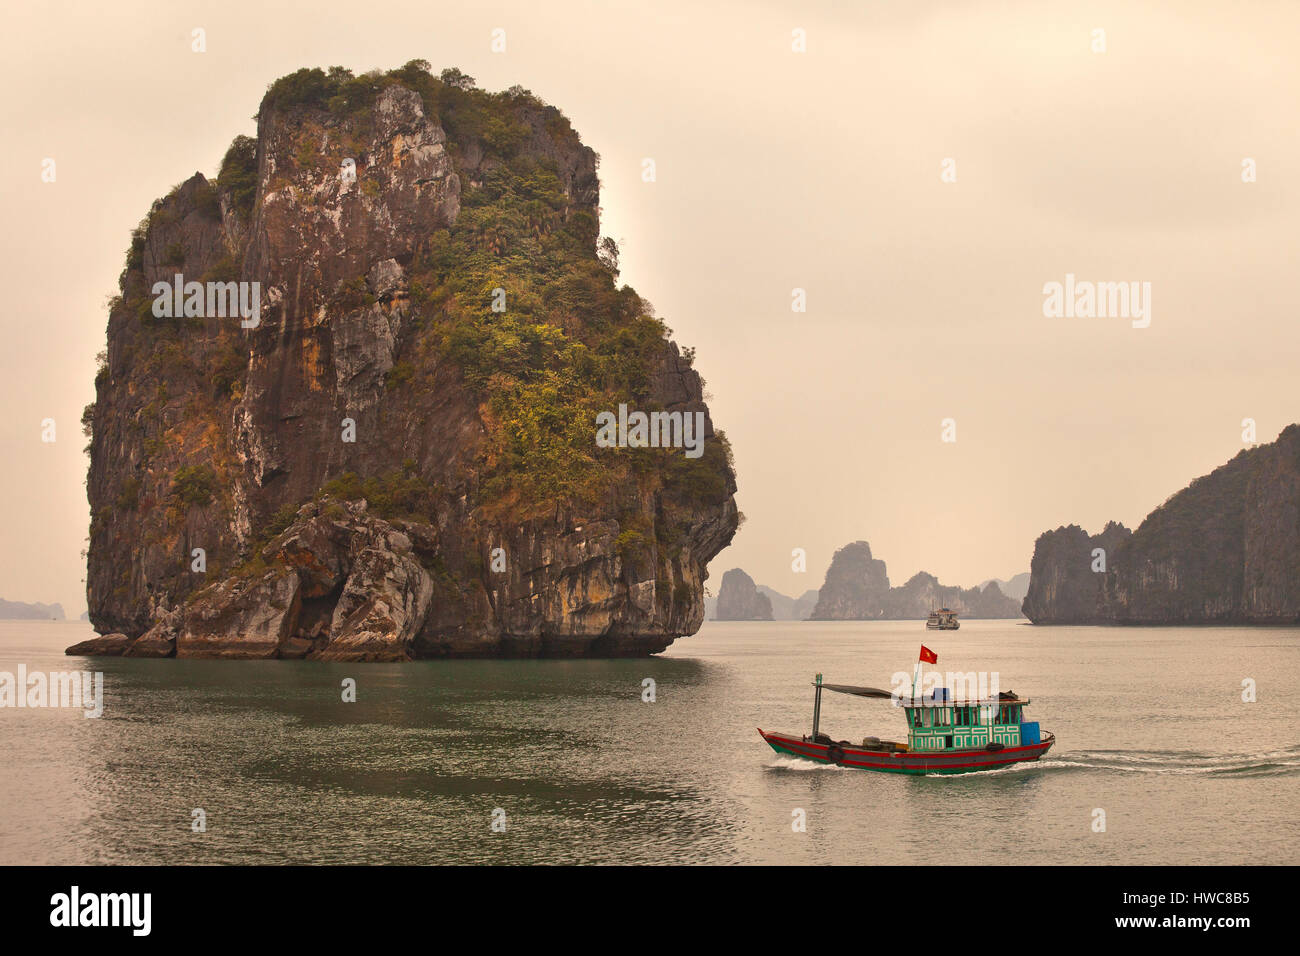 Halong Bay, Vietnam, limestone outcrops rise from the South China sea Stock Photo